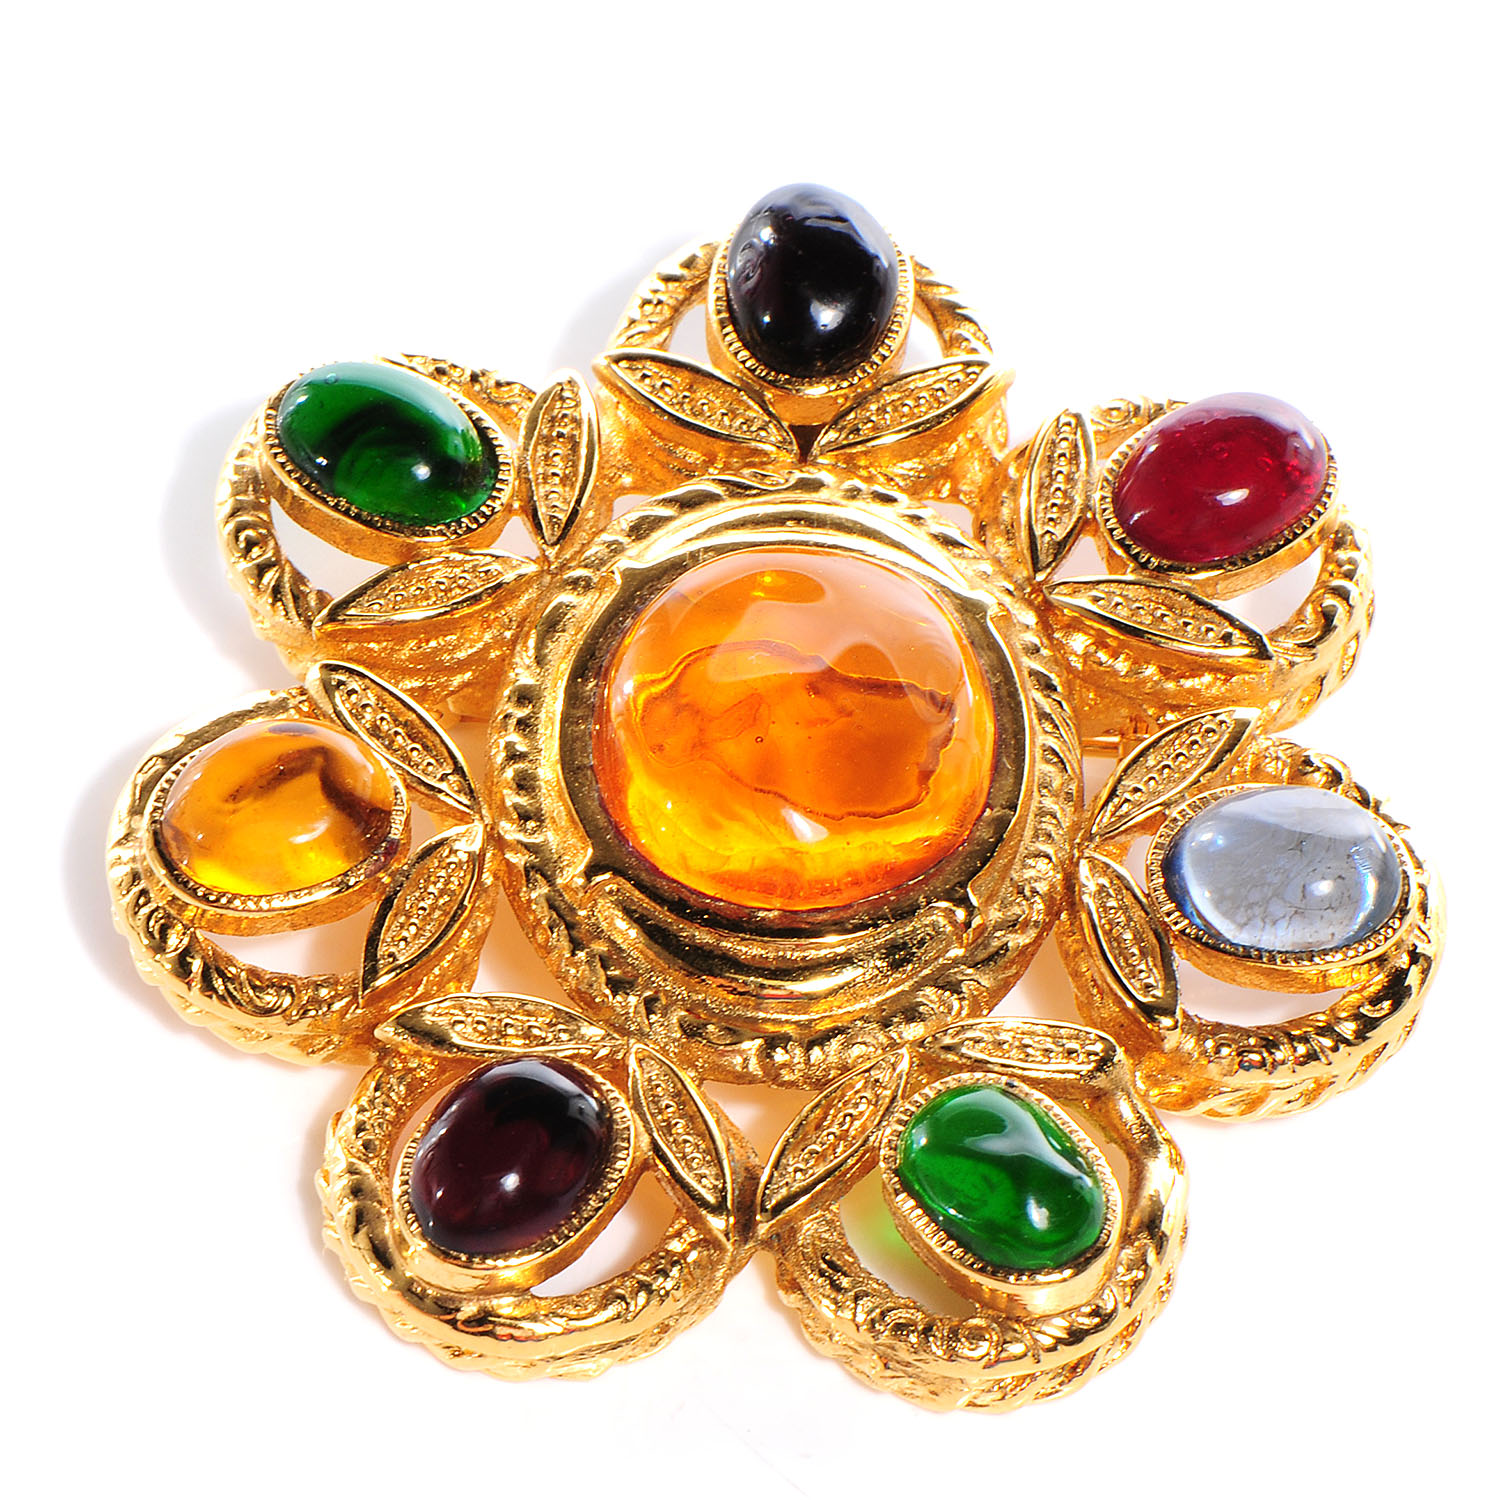 CHANEL Gripoix Poured Glass Brooch Pin Gold 64667